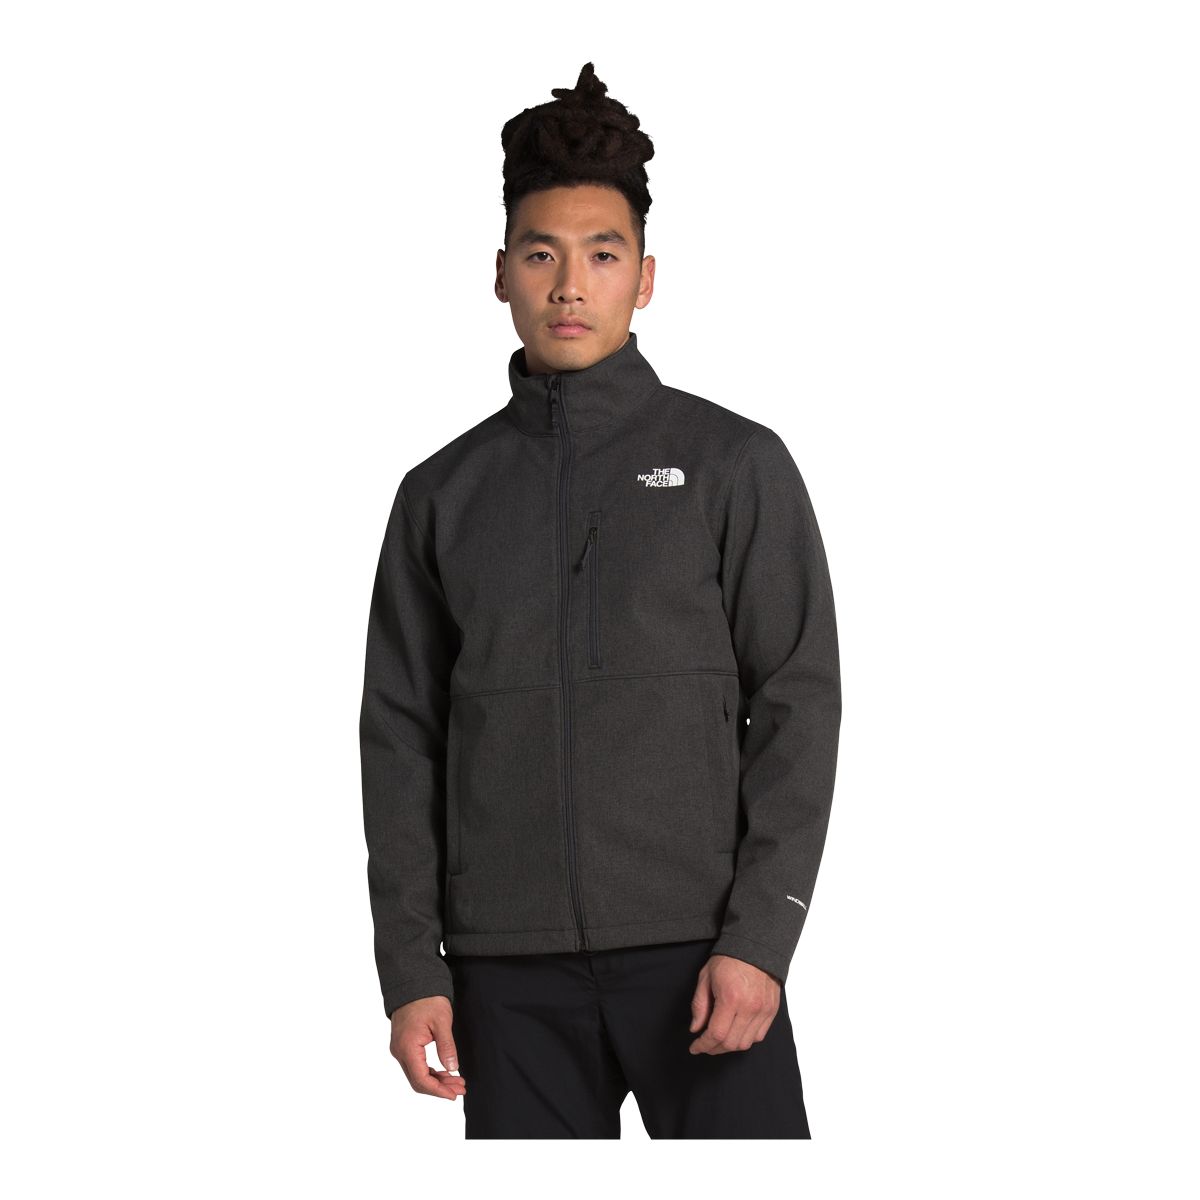 The North Face Men's Apex Bionic Jacket | Atmosphere